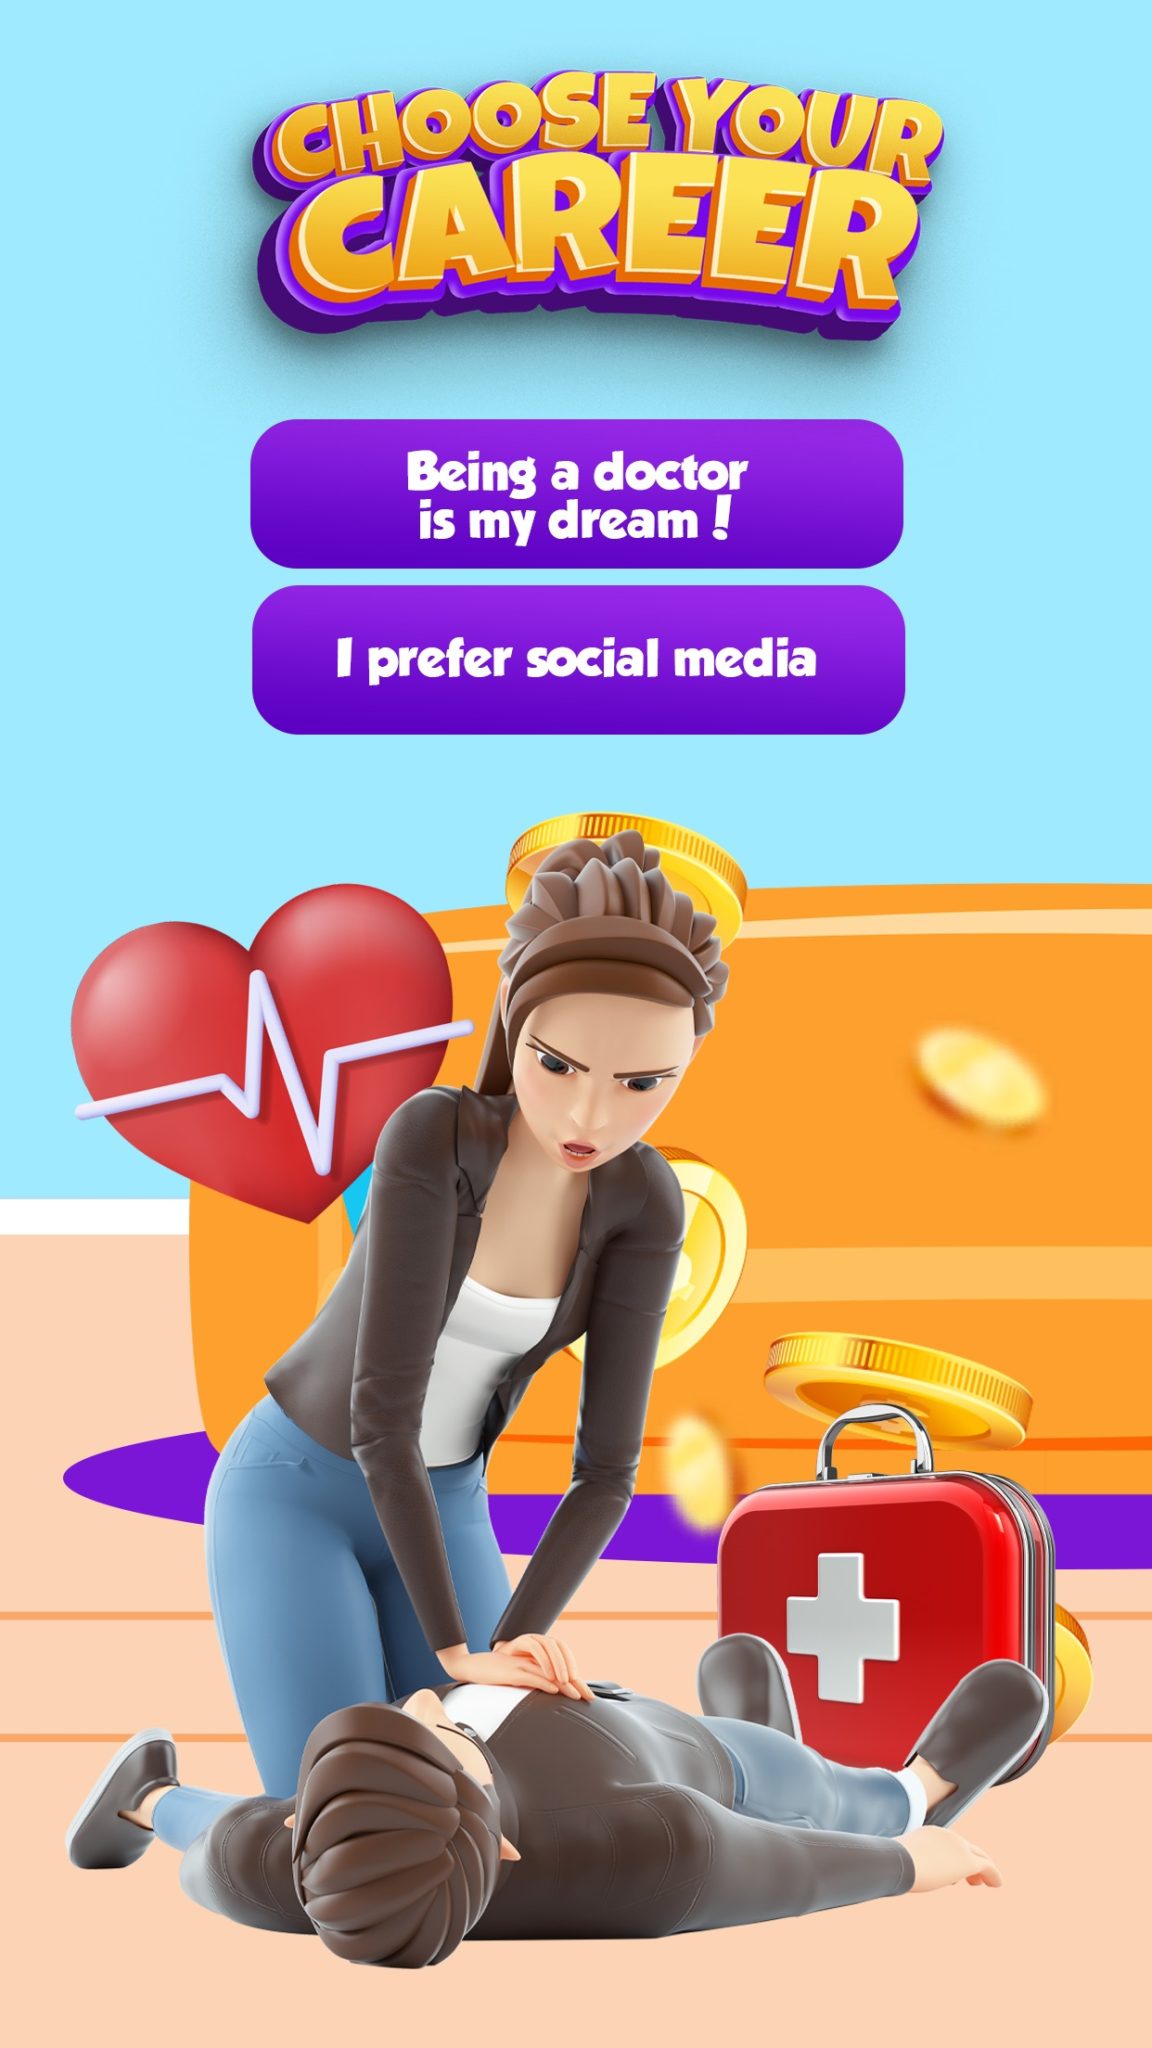 11 Cool Life Simulation Games Like Bitlife Freeappsforme Free Apps For Android And Ios